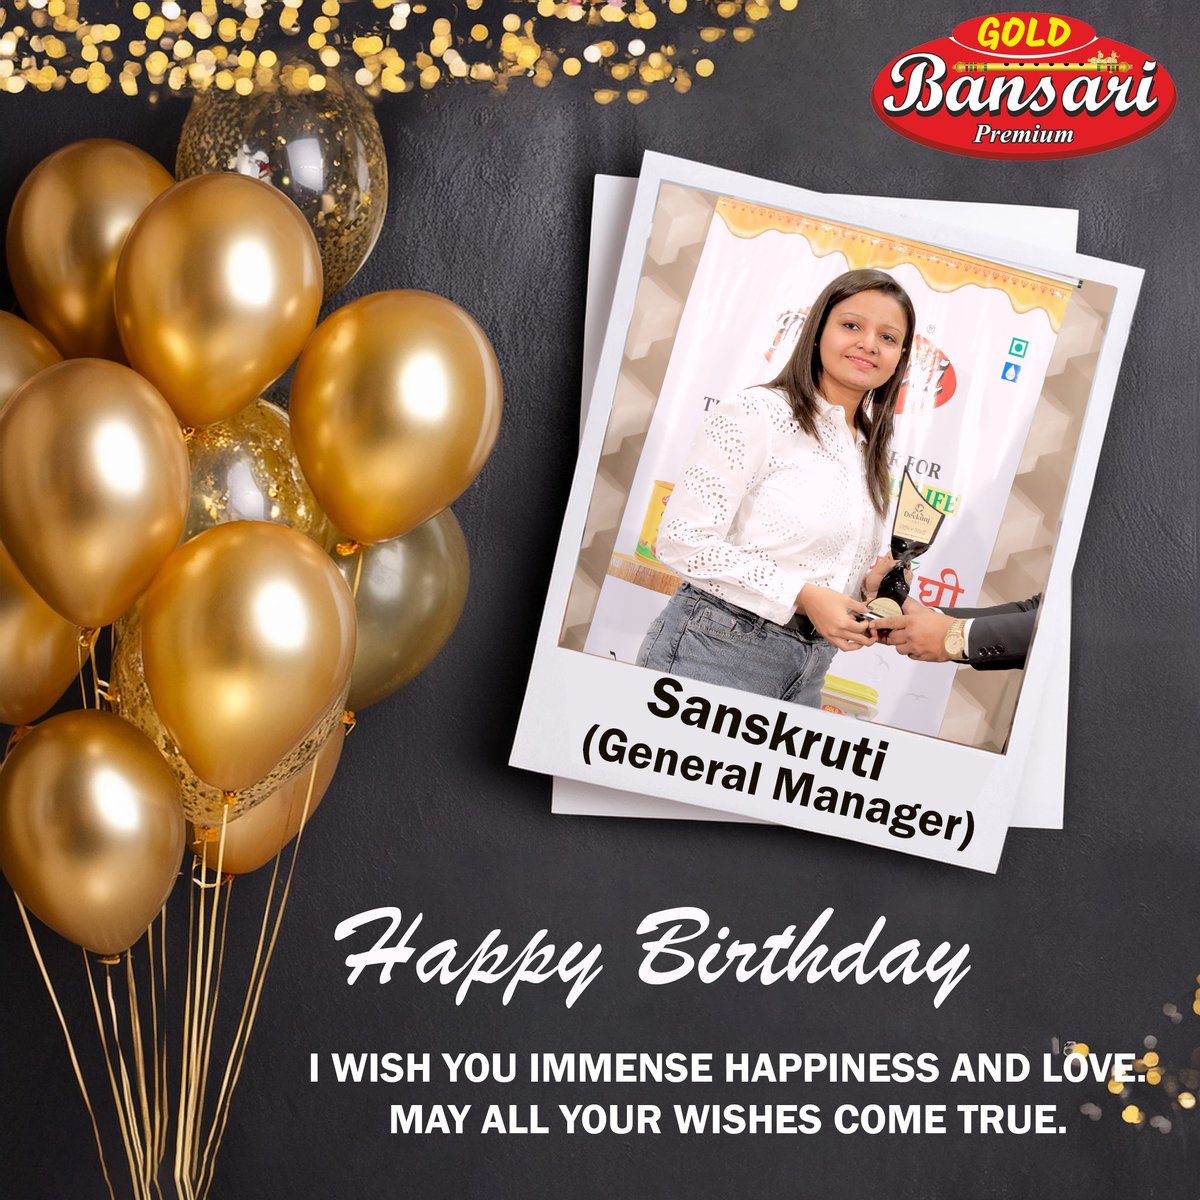 Wishing a Very Happy Birthday to our General Manager, Sanskruti Patel! 🎂 Your leadership inspires us all at Gold Bansari. Here's to another year of success and prosperity! #goldbansarighee #TeamGoldBansari #LeadershipExcellence #birthday #happybirthday@MilkDevkunj